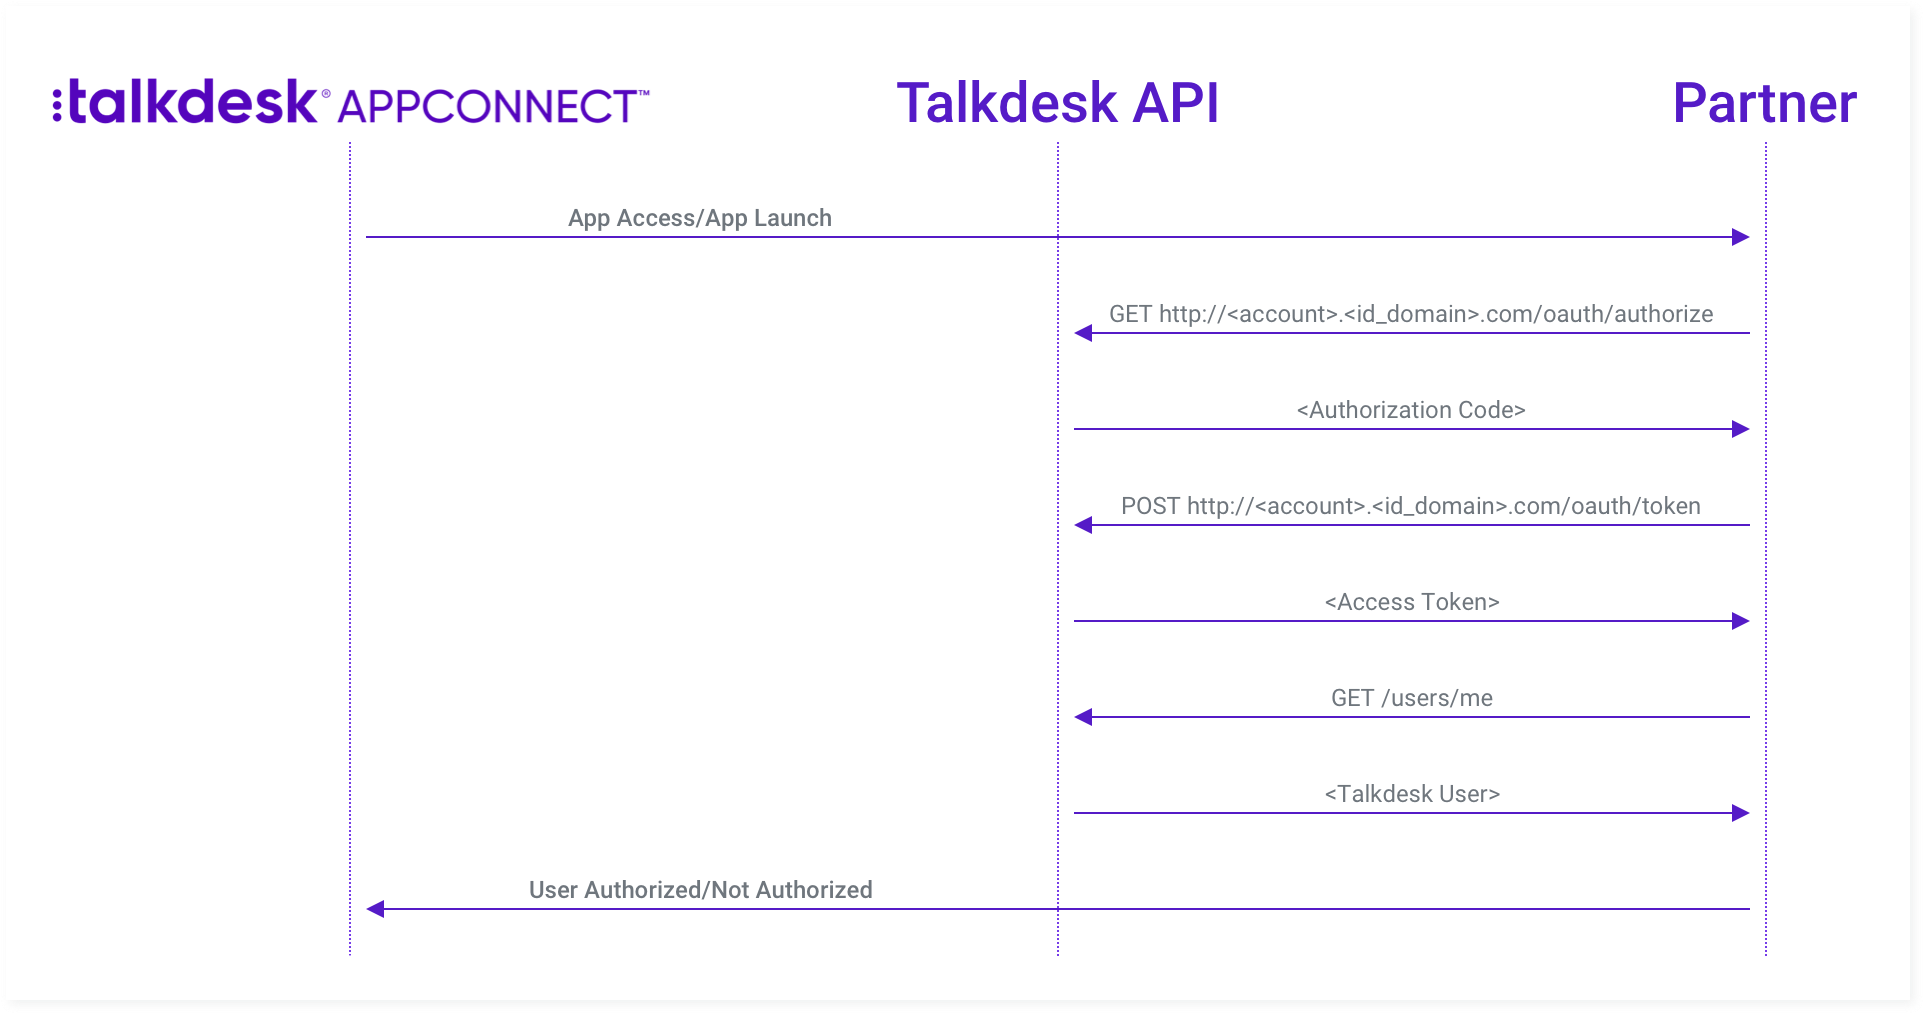 Figure 2 - App Access and Launch